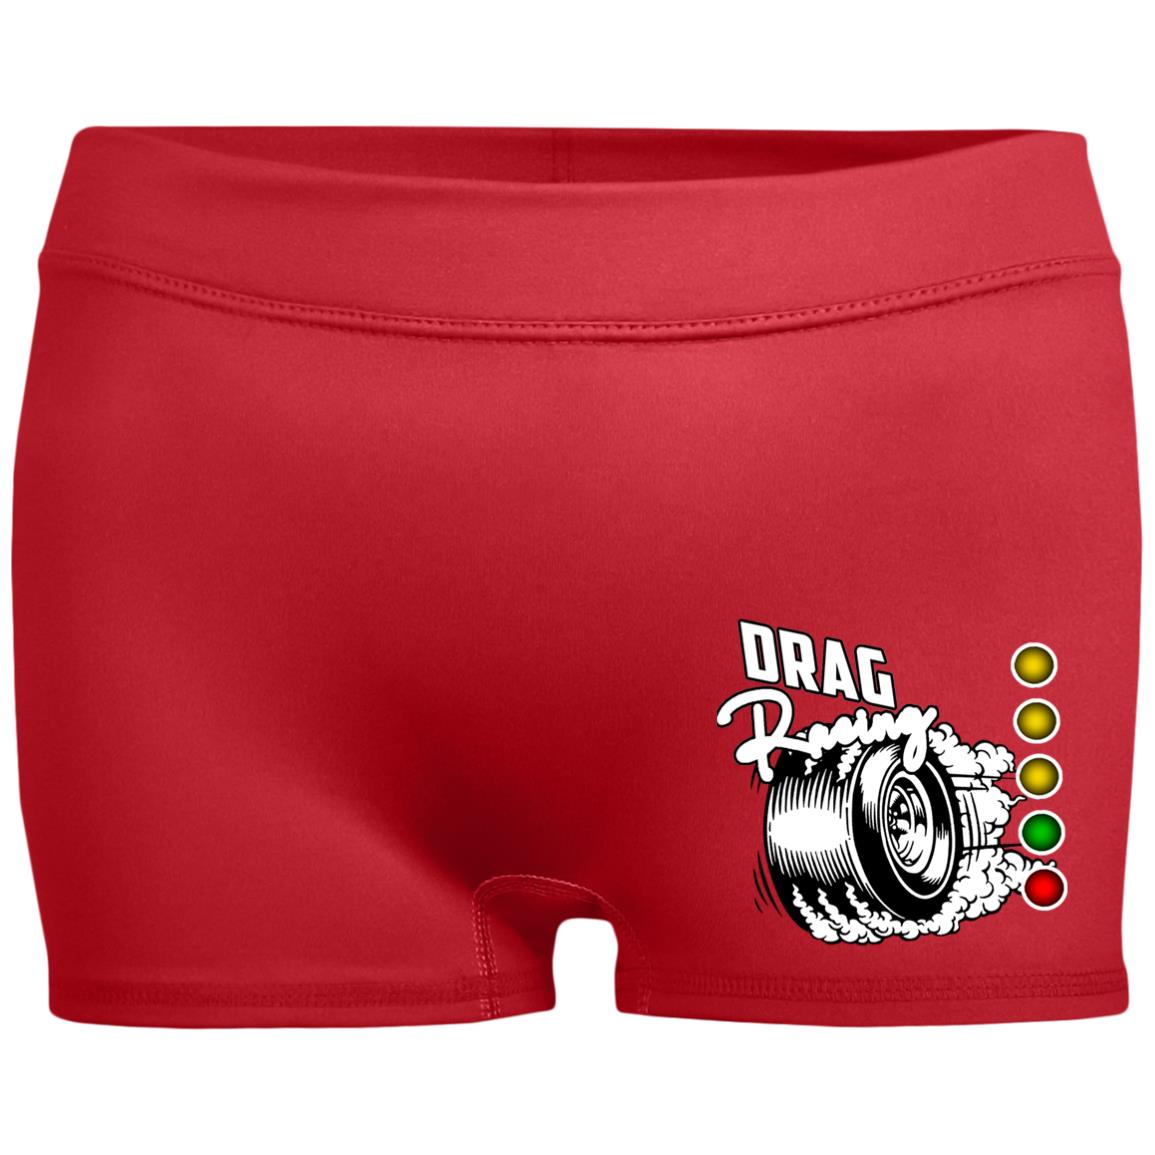 Drag Racing Ladies' Fitted Moisture-Wicking 2.5 inch Inseam Shorts